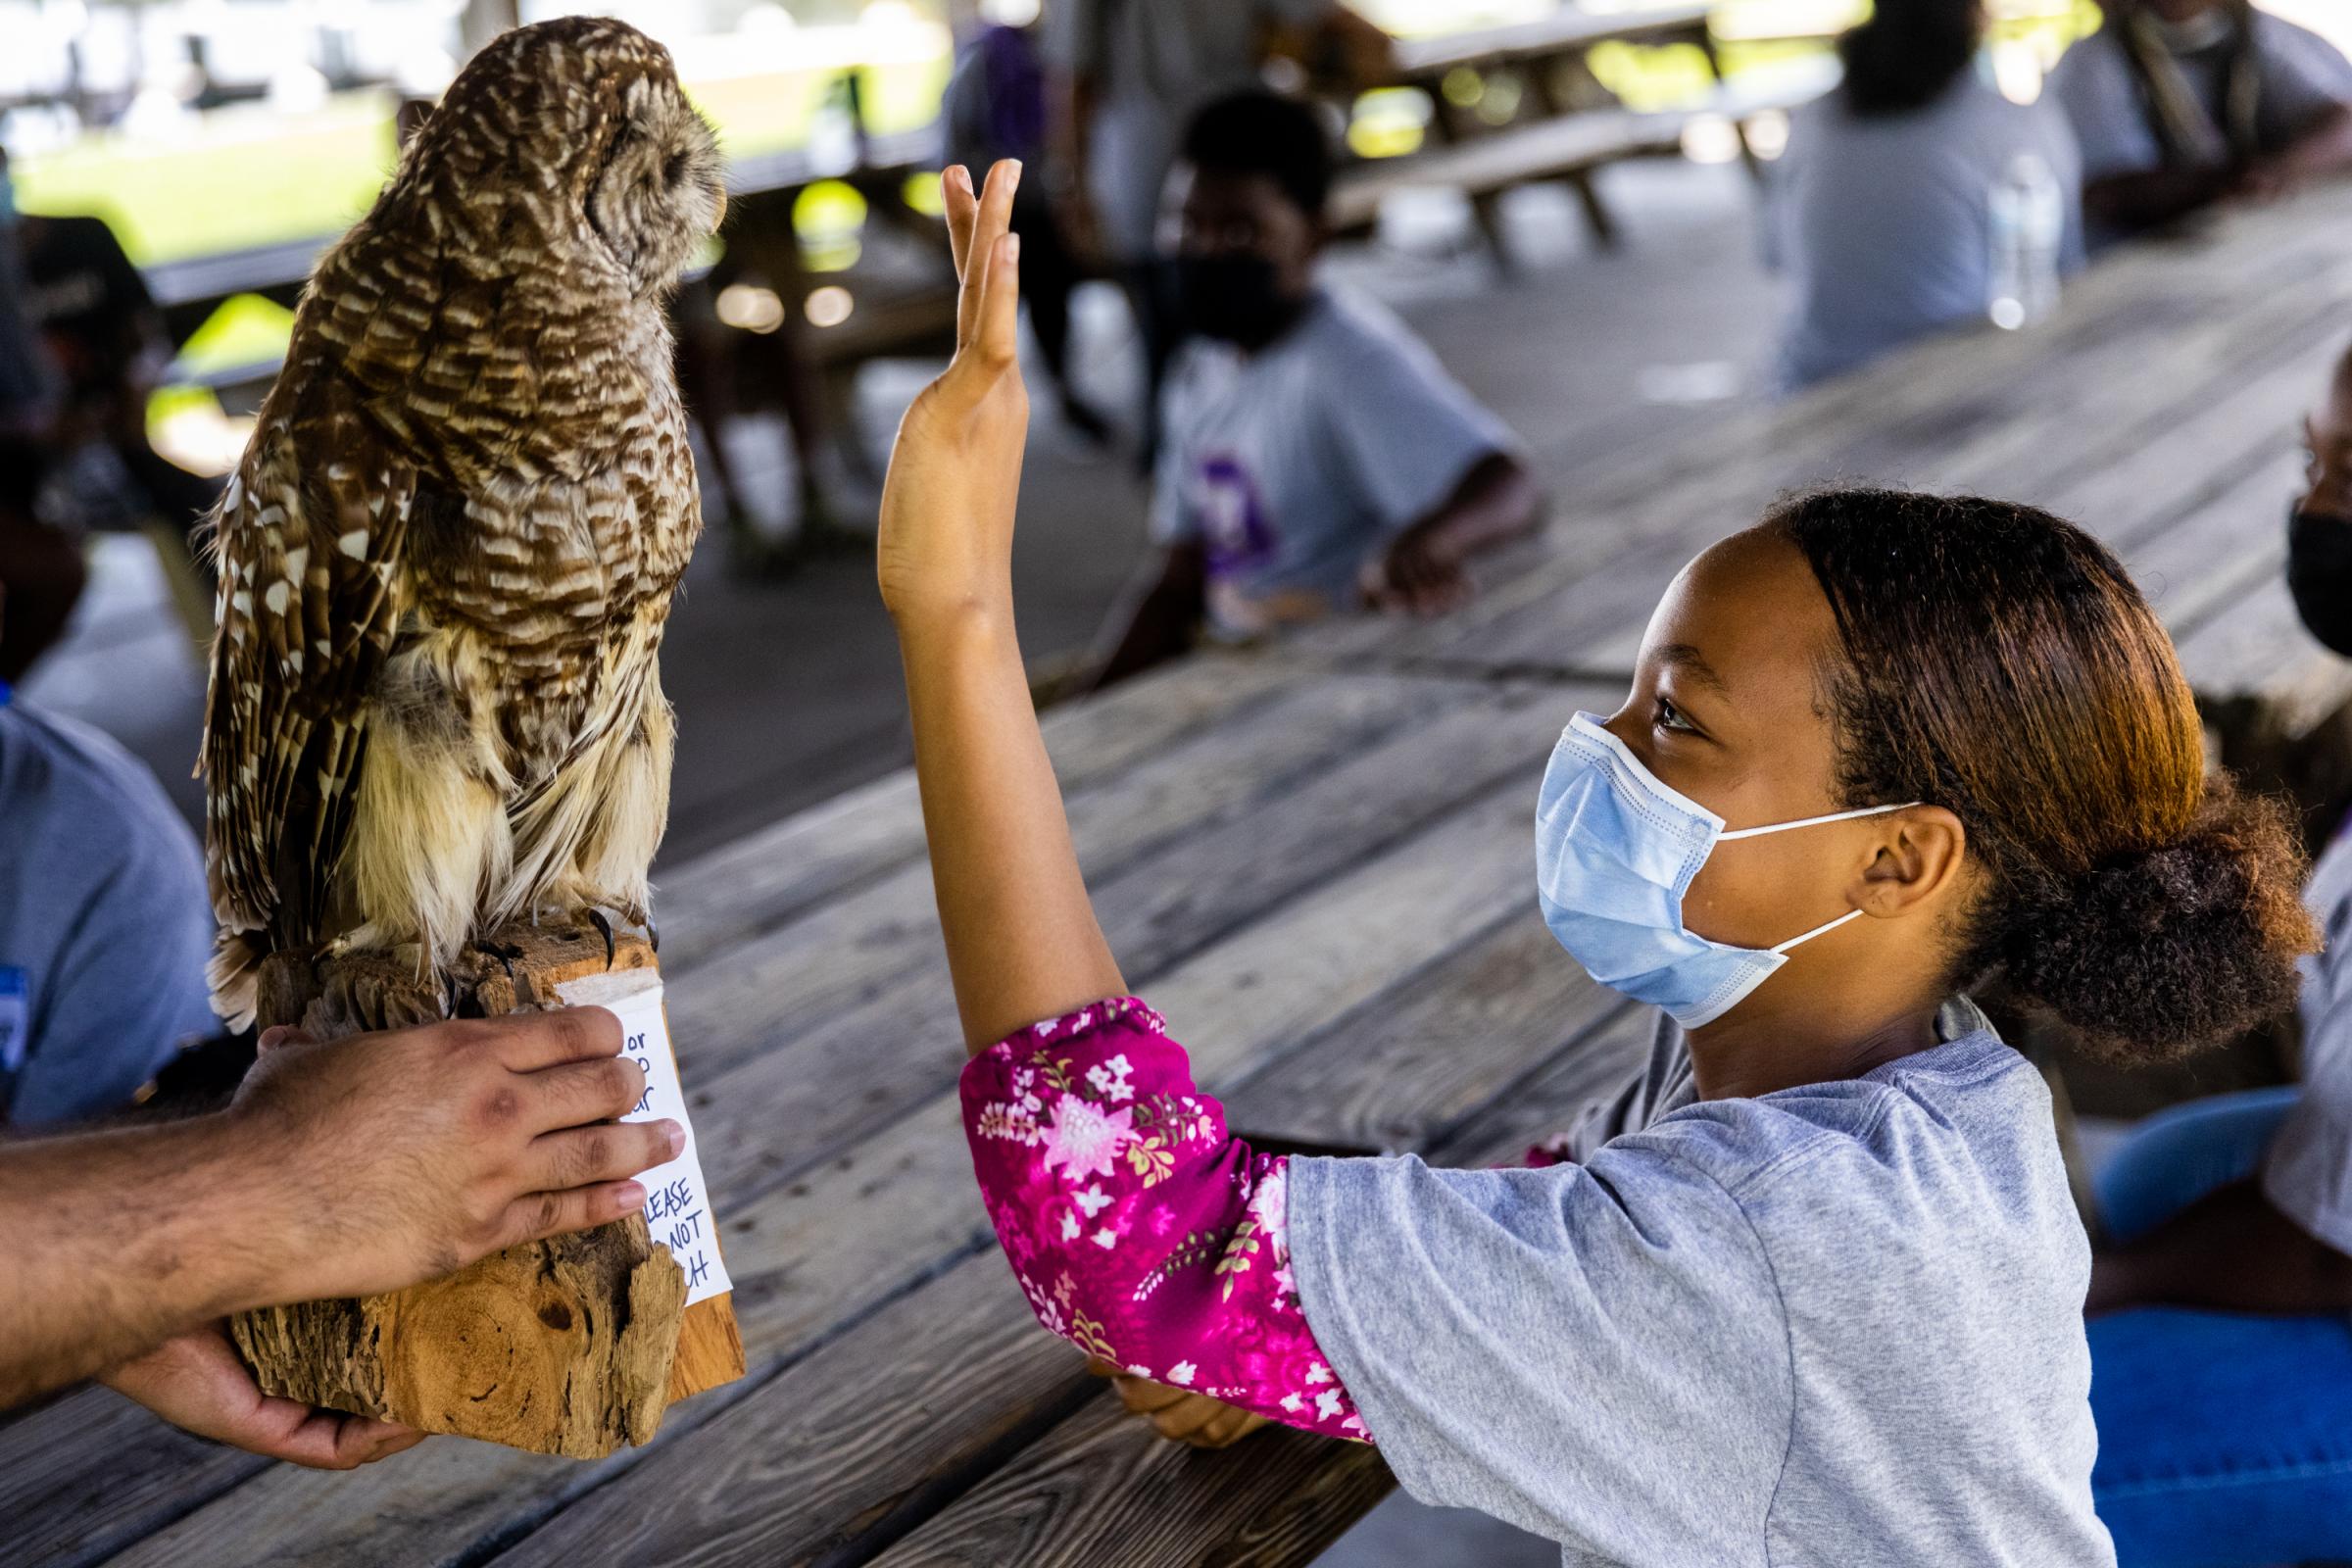 Turner Station: Heart and Soul - Brianna Dent reaches up to touch a taxidermied barred owl...